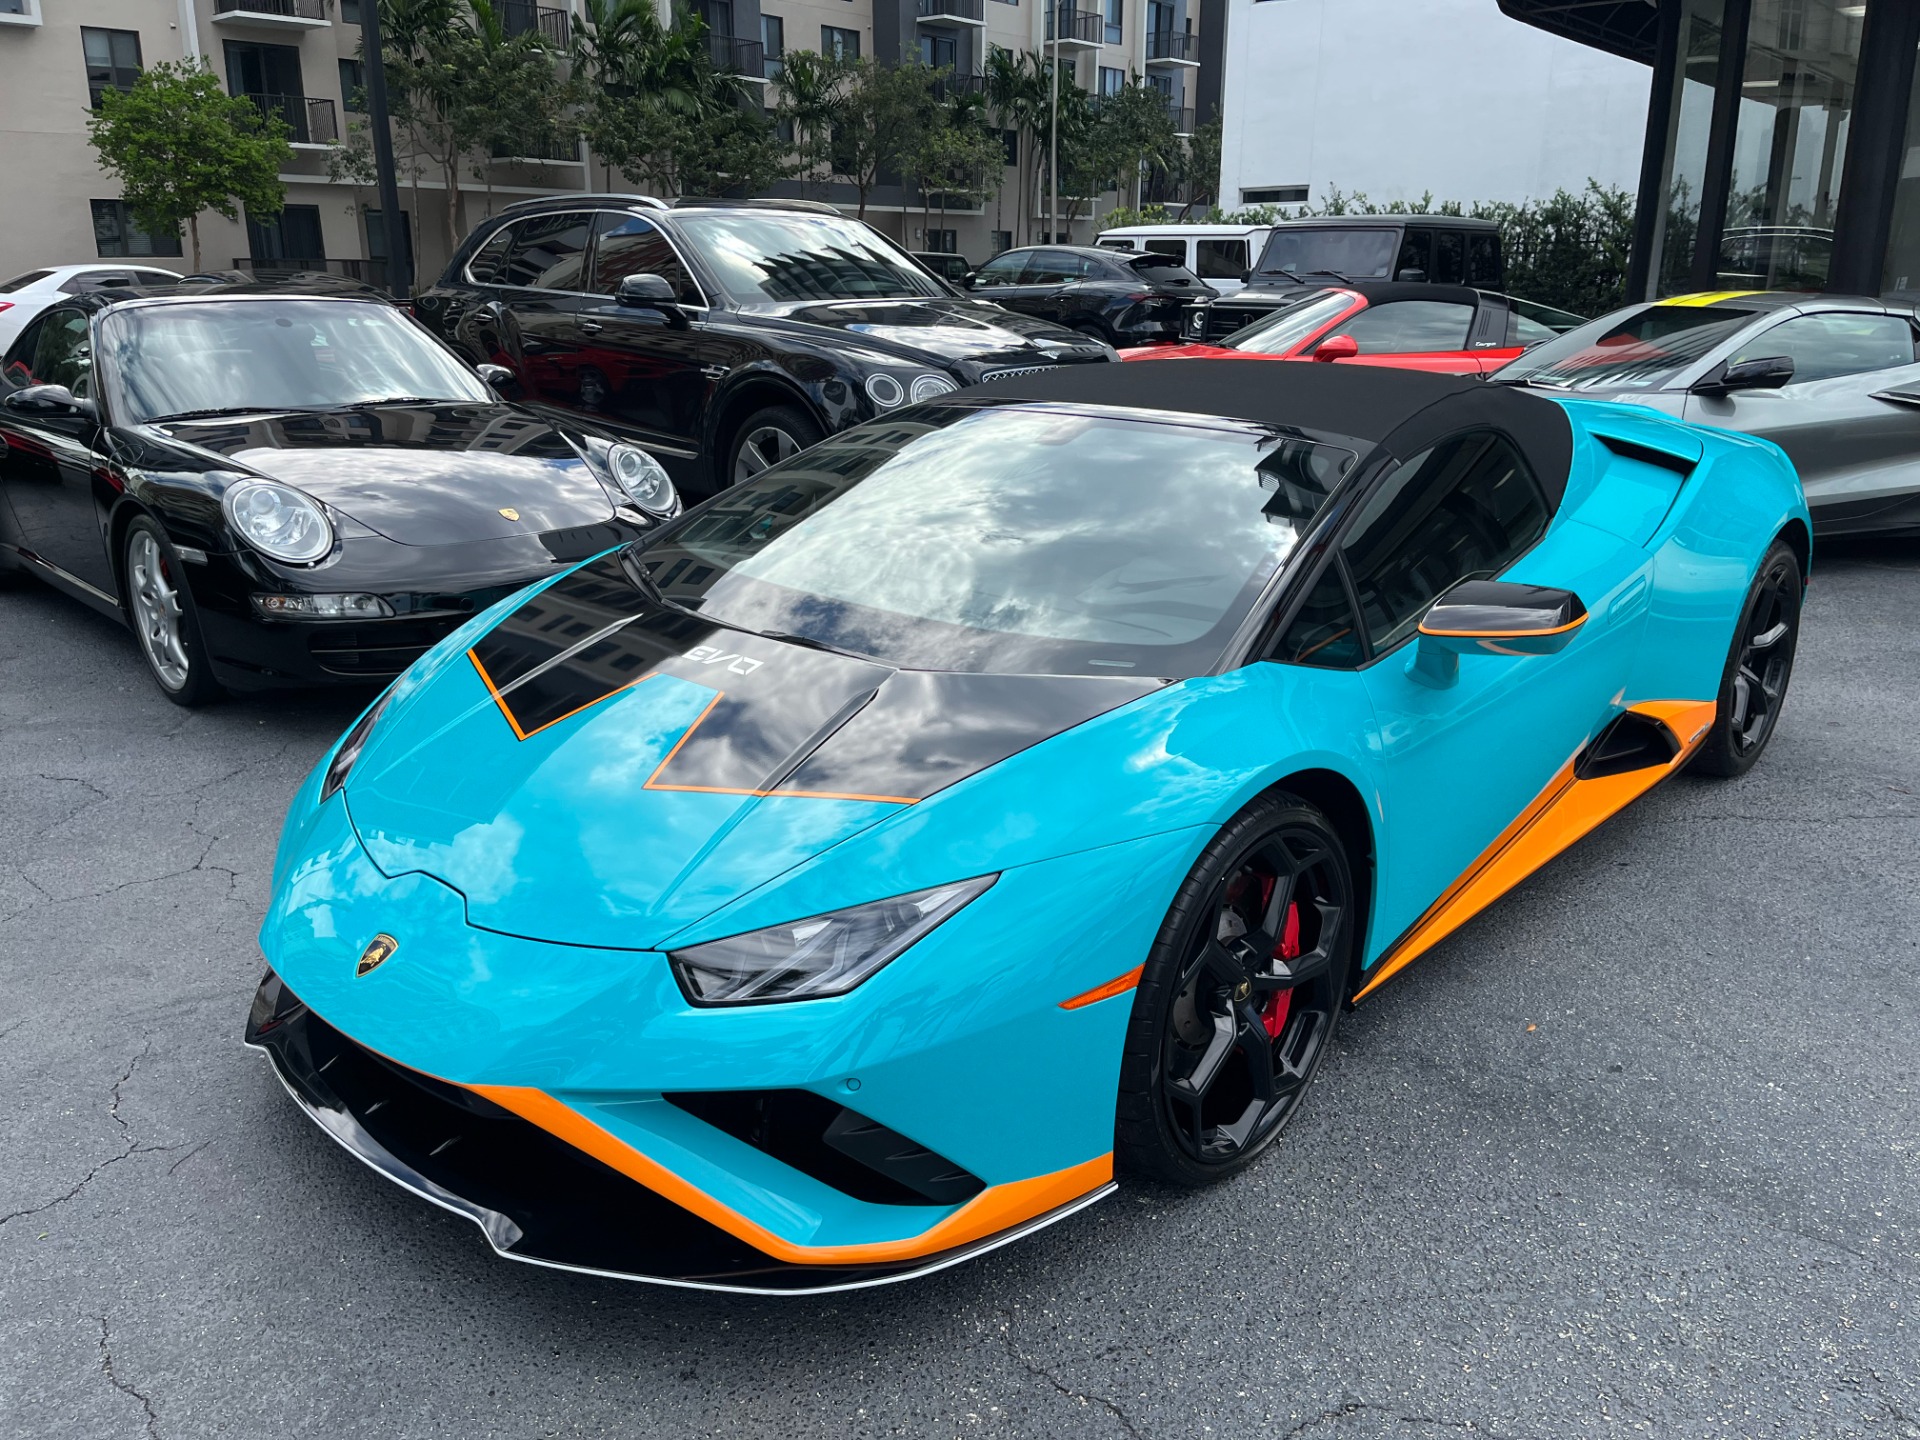 Used 2021 Lamborghini Huracan LP 610-4 EVO Spyder for sale Call for price at The Gables Sports Cars in Miami FL 33146 4